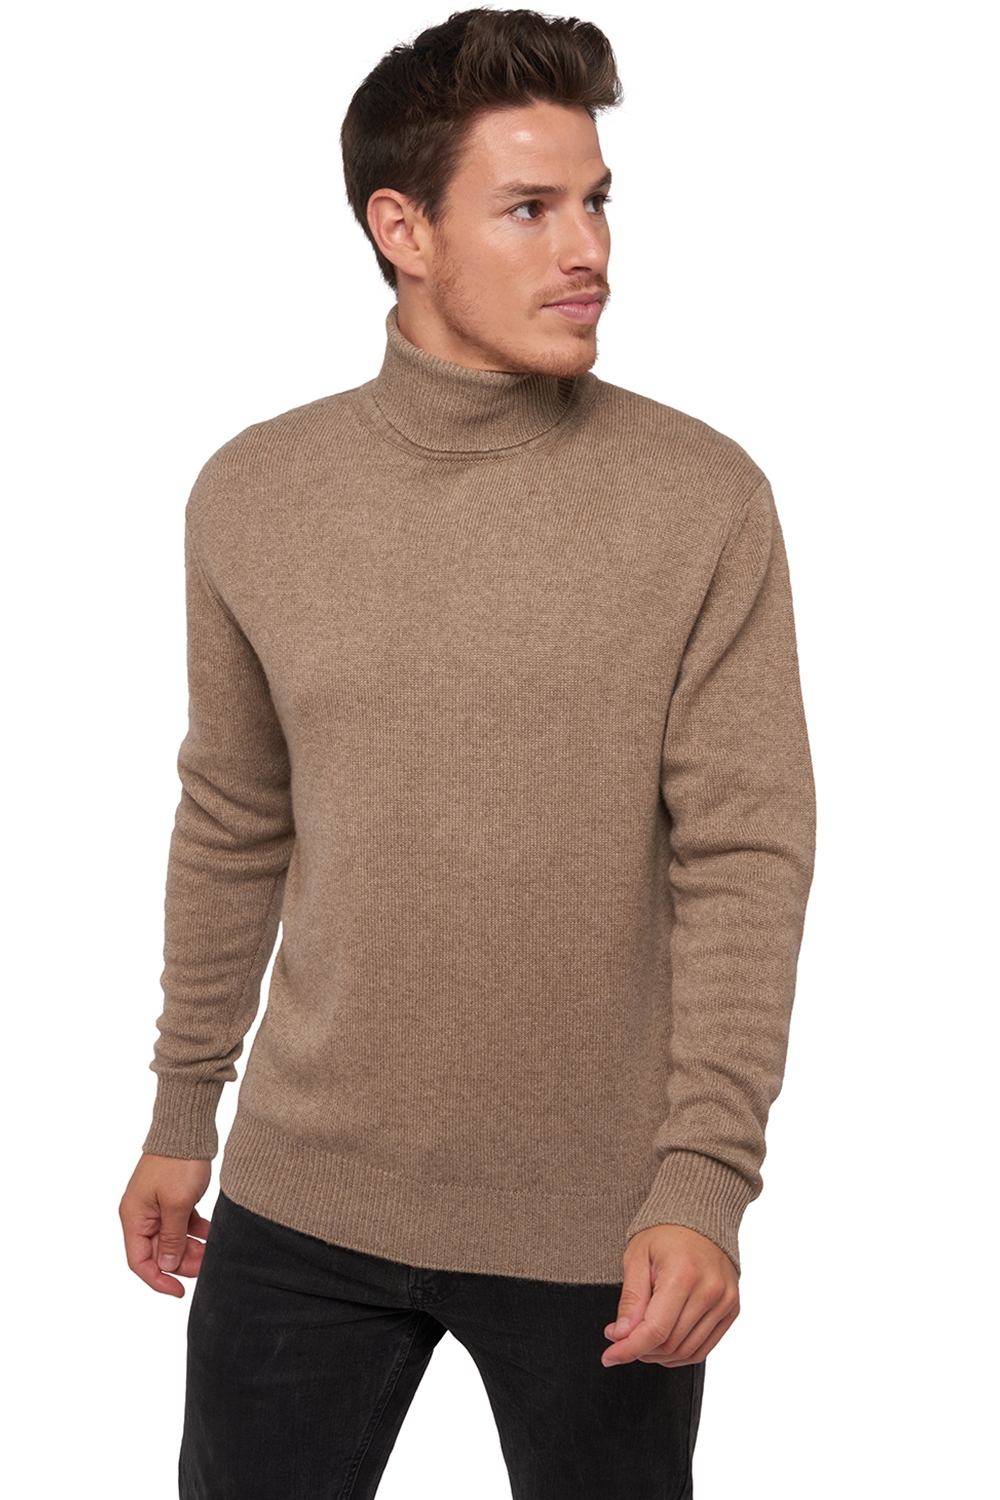 Cachemire pull homme edgar 4f natural brown xs